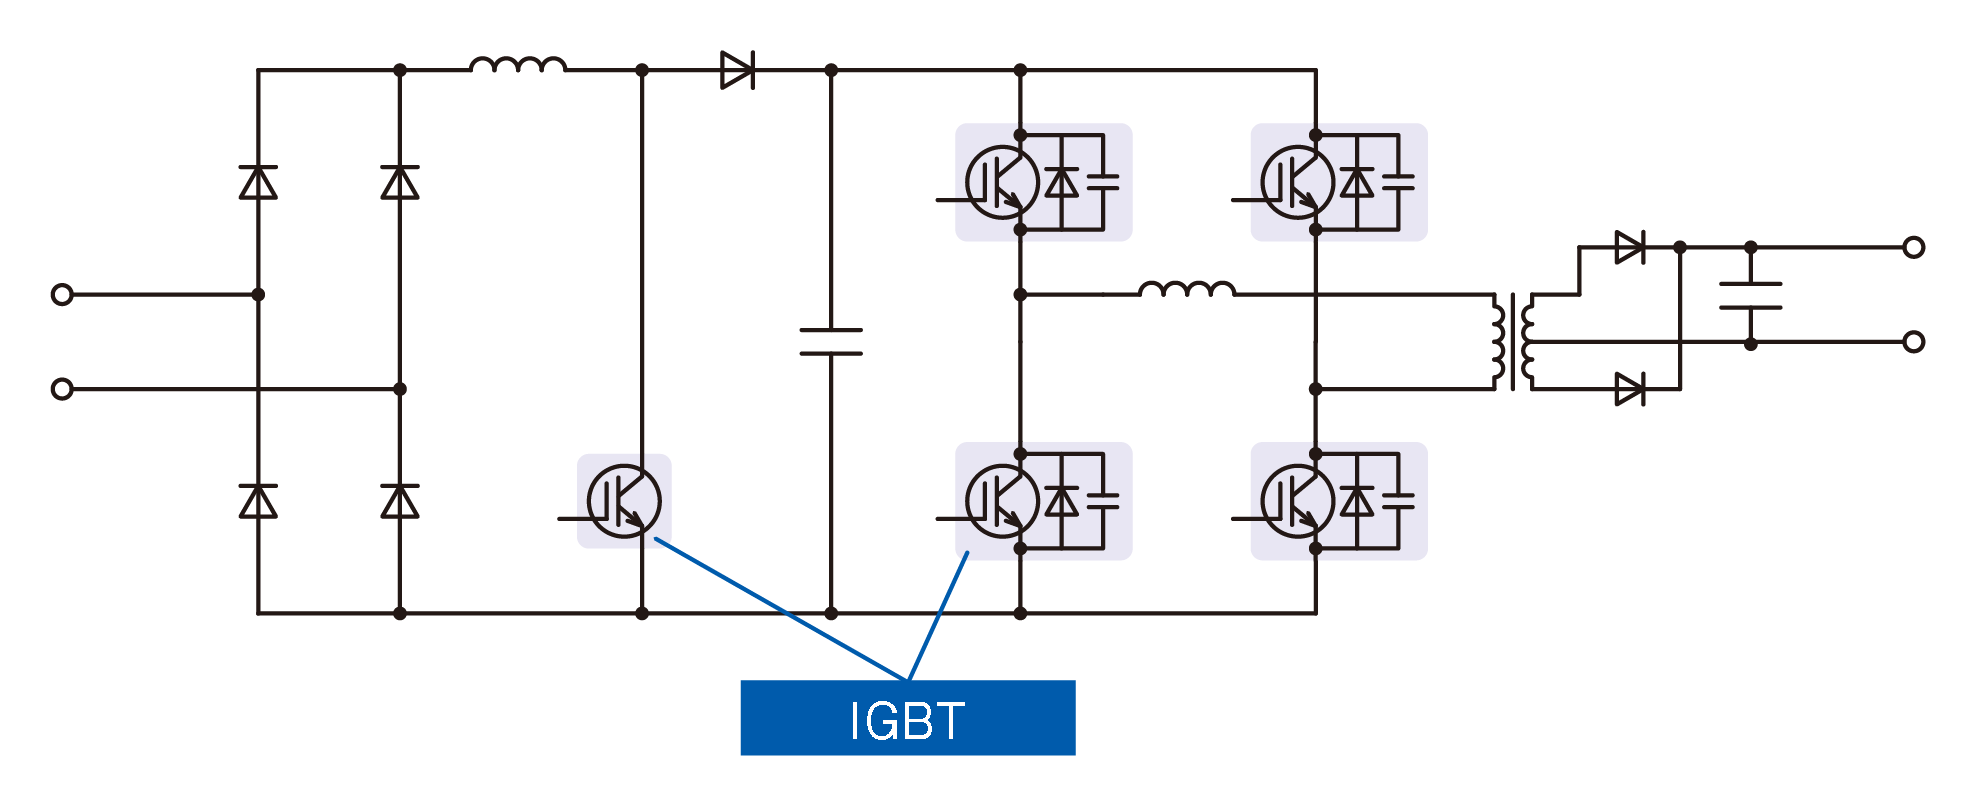 Figure 4. Phase Shift Soft switching converter (ZVZCS)